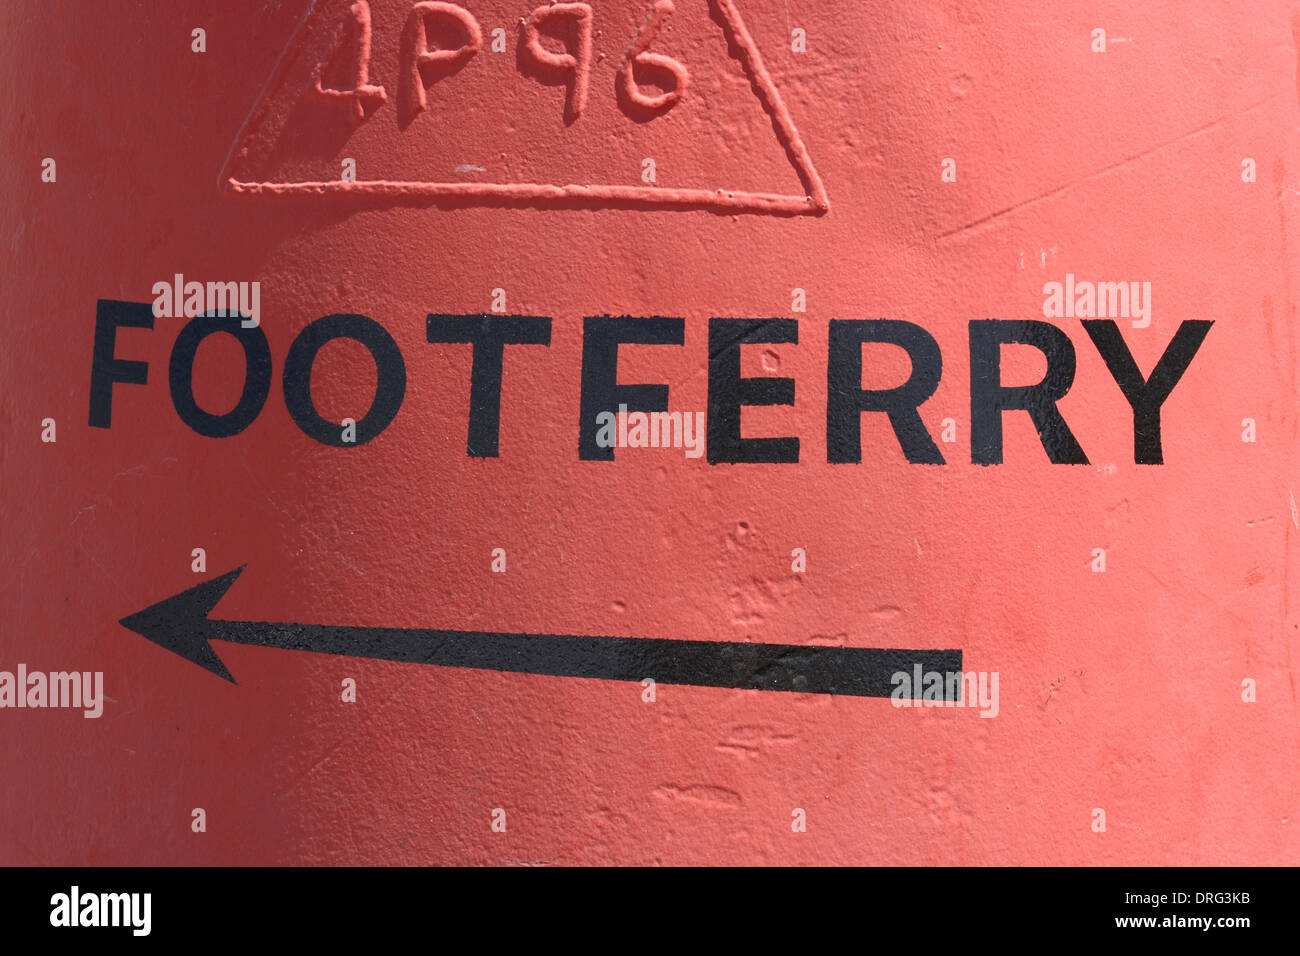 Foot ferry sign found at Felixstowe Ferry Stock Photo